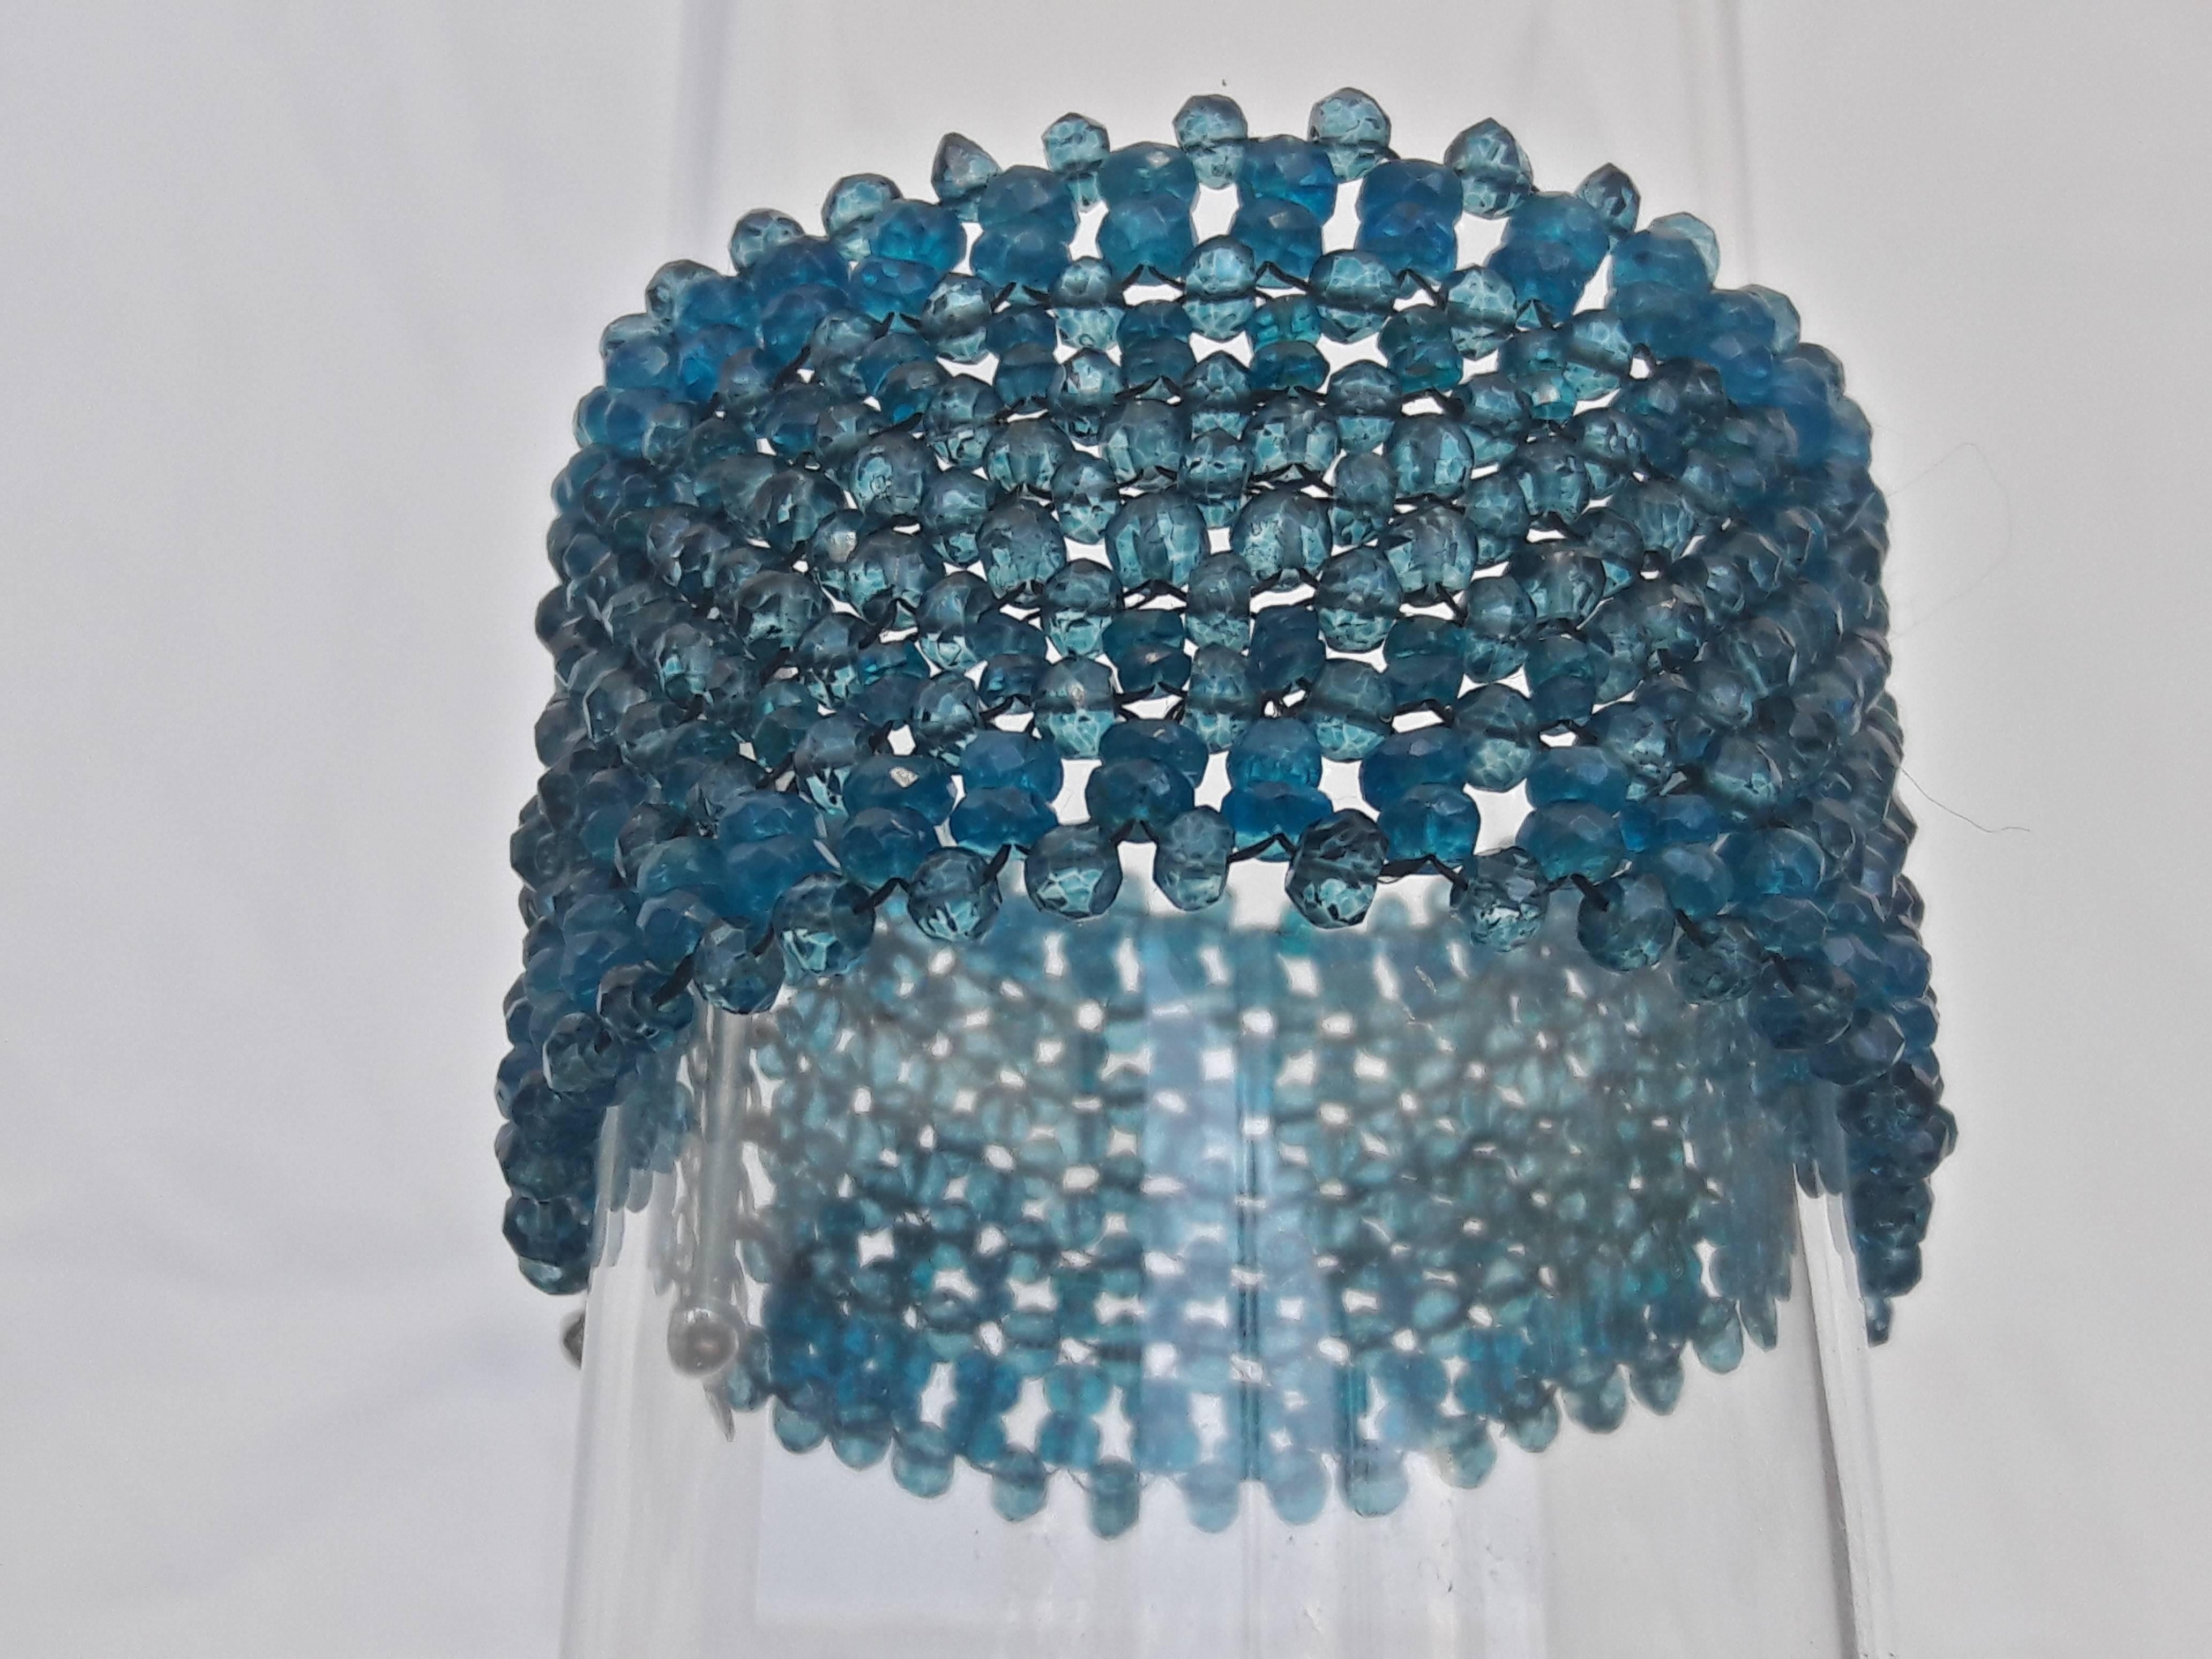 Vibrant, lush, and cool. This bracelet is composed by tightly weaving a multi-strand ribbon of small faceted semi-precious beads. The London Blue Topaz center band is highlighted and framed by the faceted Apatite beads running along the edges.